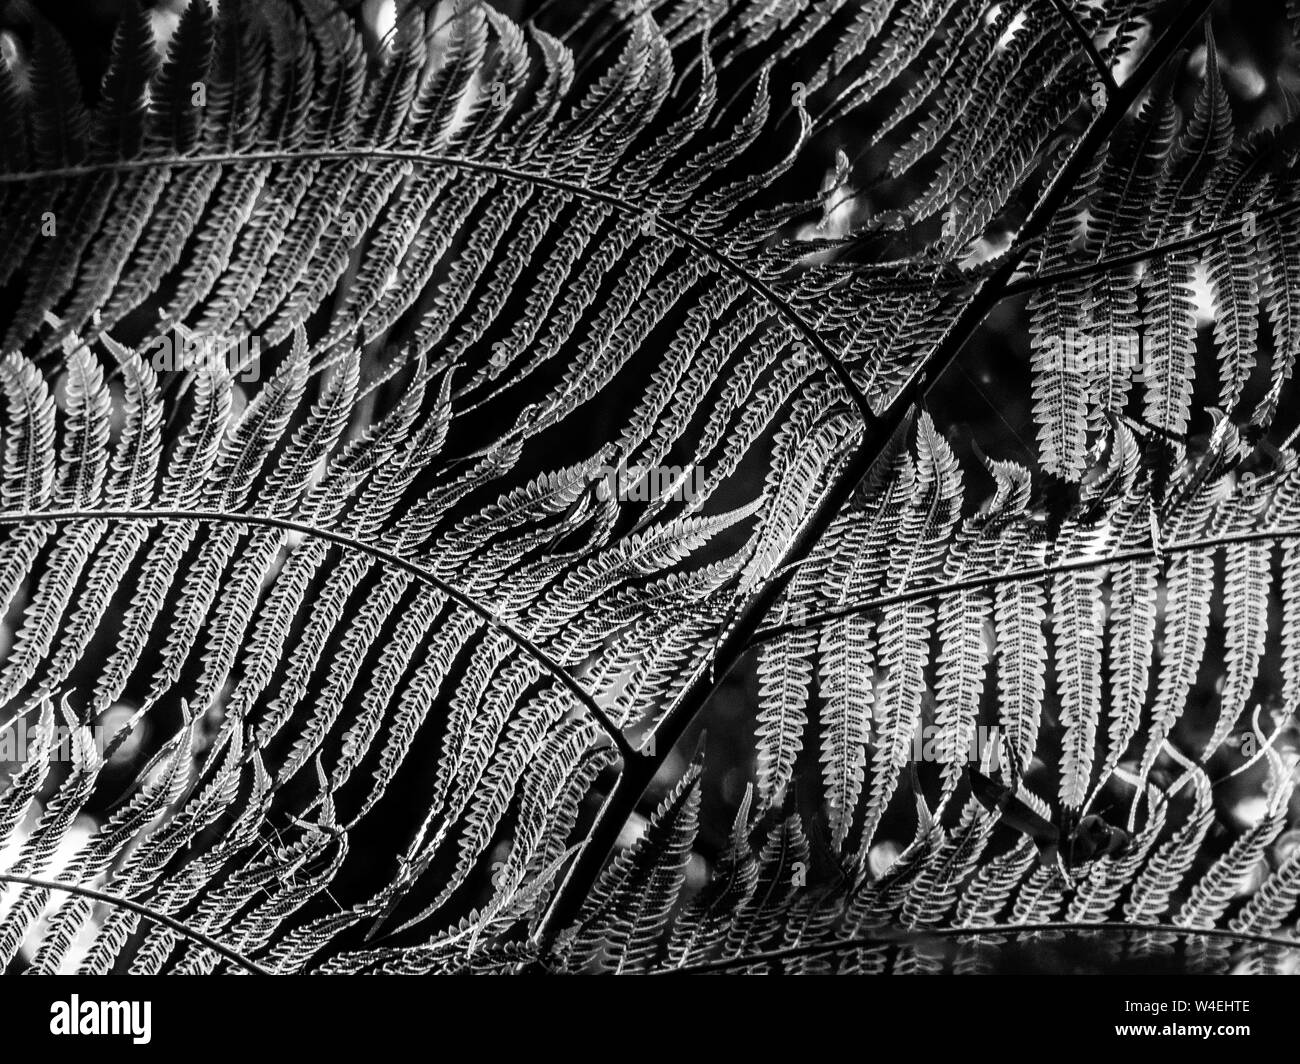 Patterns in nature, Monochrome of Fern leaves or fronds closeup, Australian garden Stock Photo